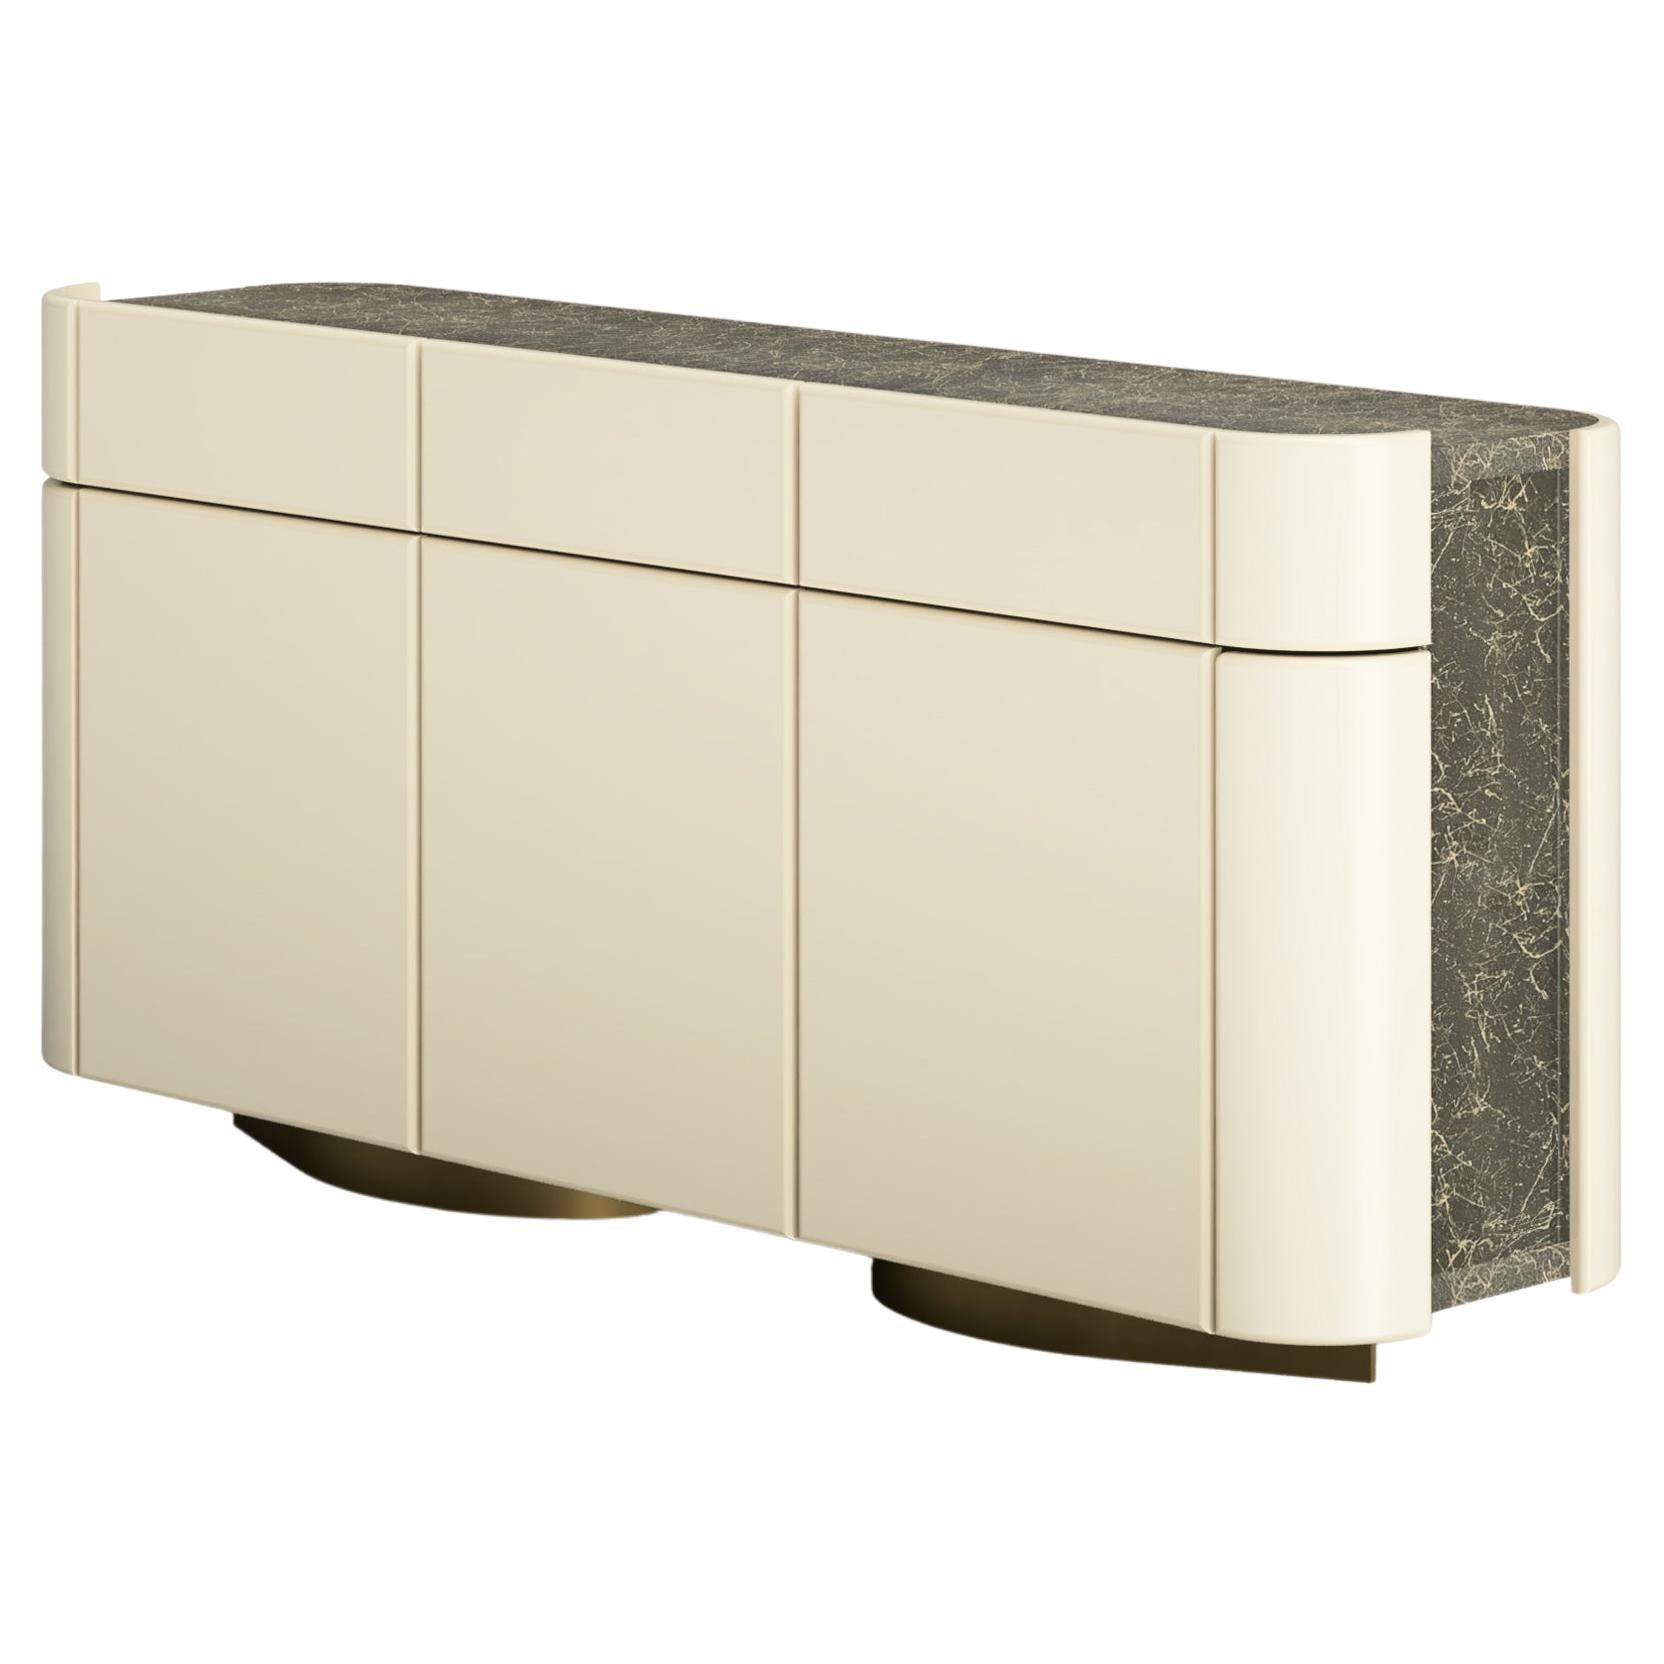 Credenza, Shiny Lacquered Wood With Textured Finish Details, Pearl Color For Sale